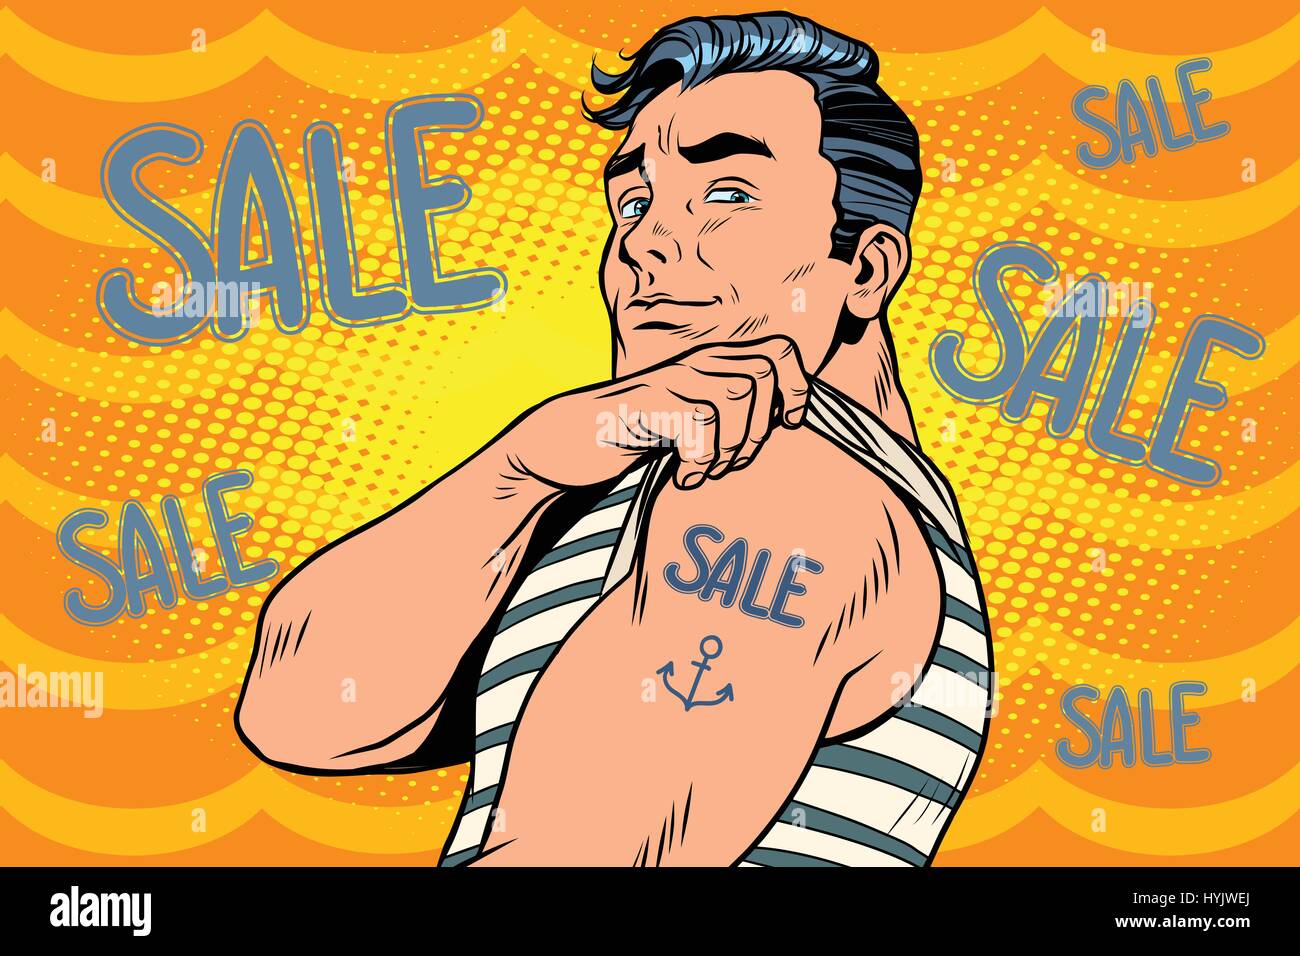 Sailor with sale tattoo on hand Stock Vector